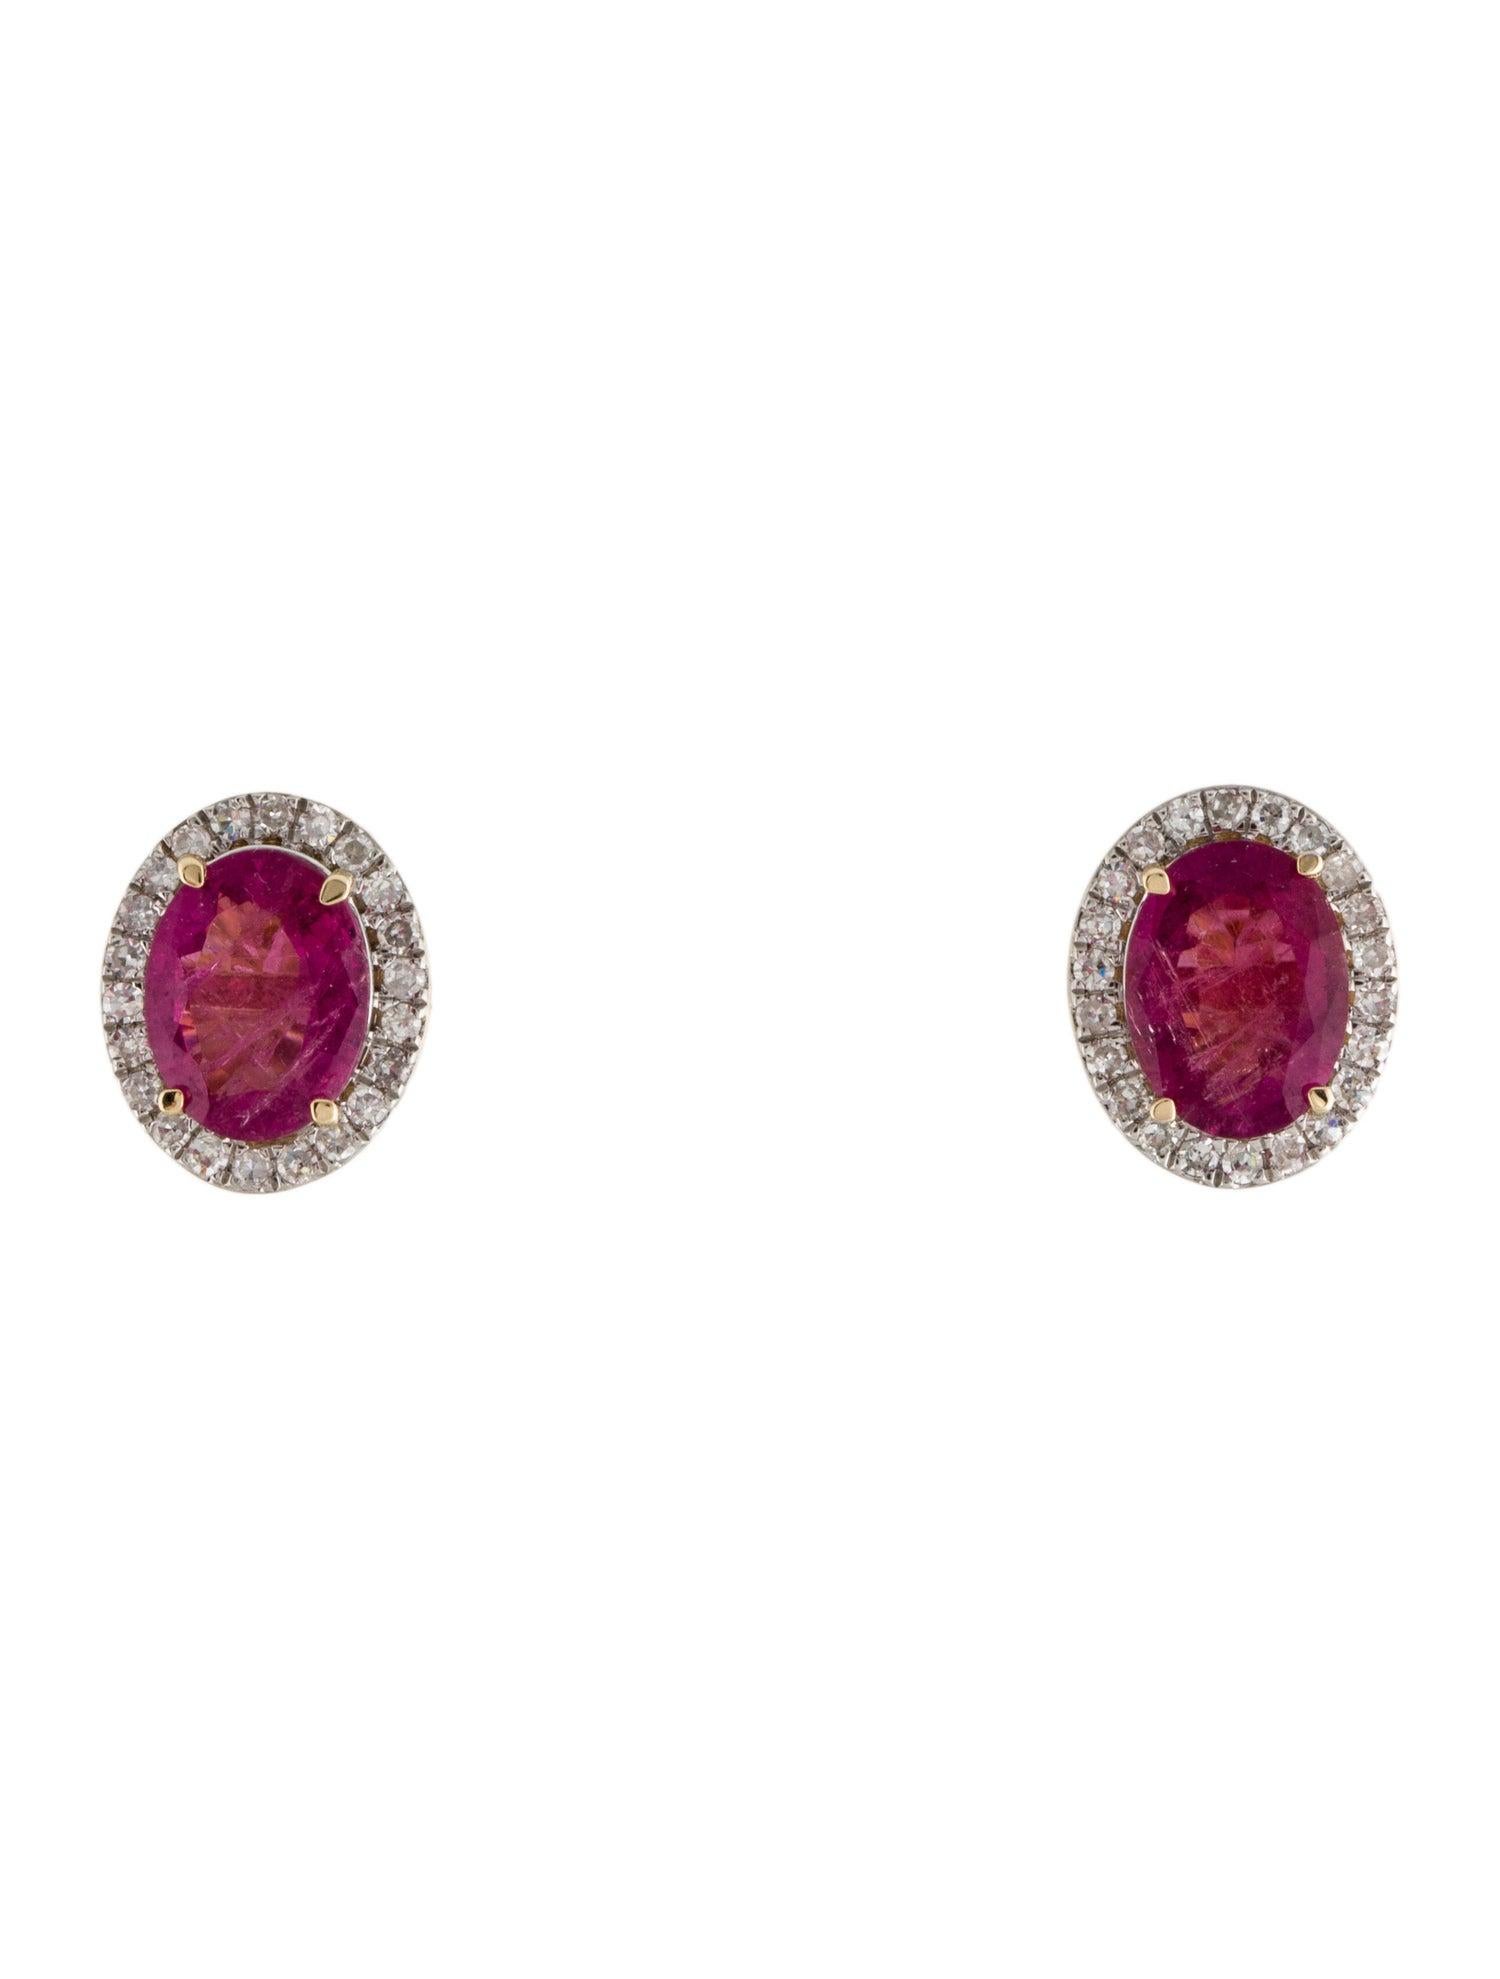 Elevate your elegance with our 'Rose Radiance' Rubellite and Diamond Earrings from the Vibrant Pink Treasures collection. These exquisite earrings are a testament to the captivating allure of the Rubellite gemstone, reminiscent of the mesmerizing